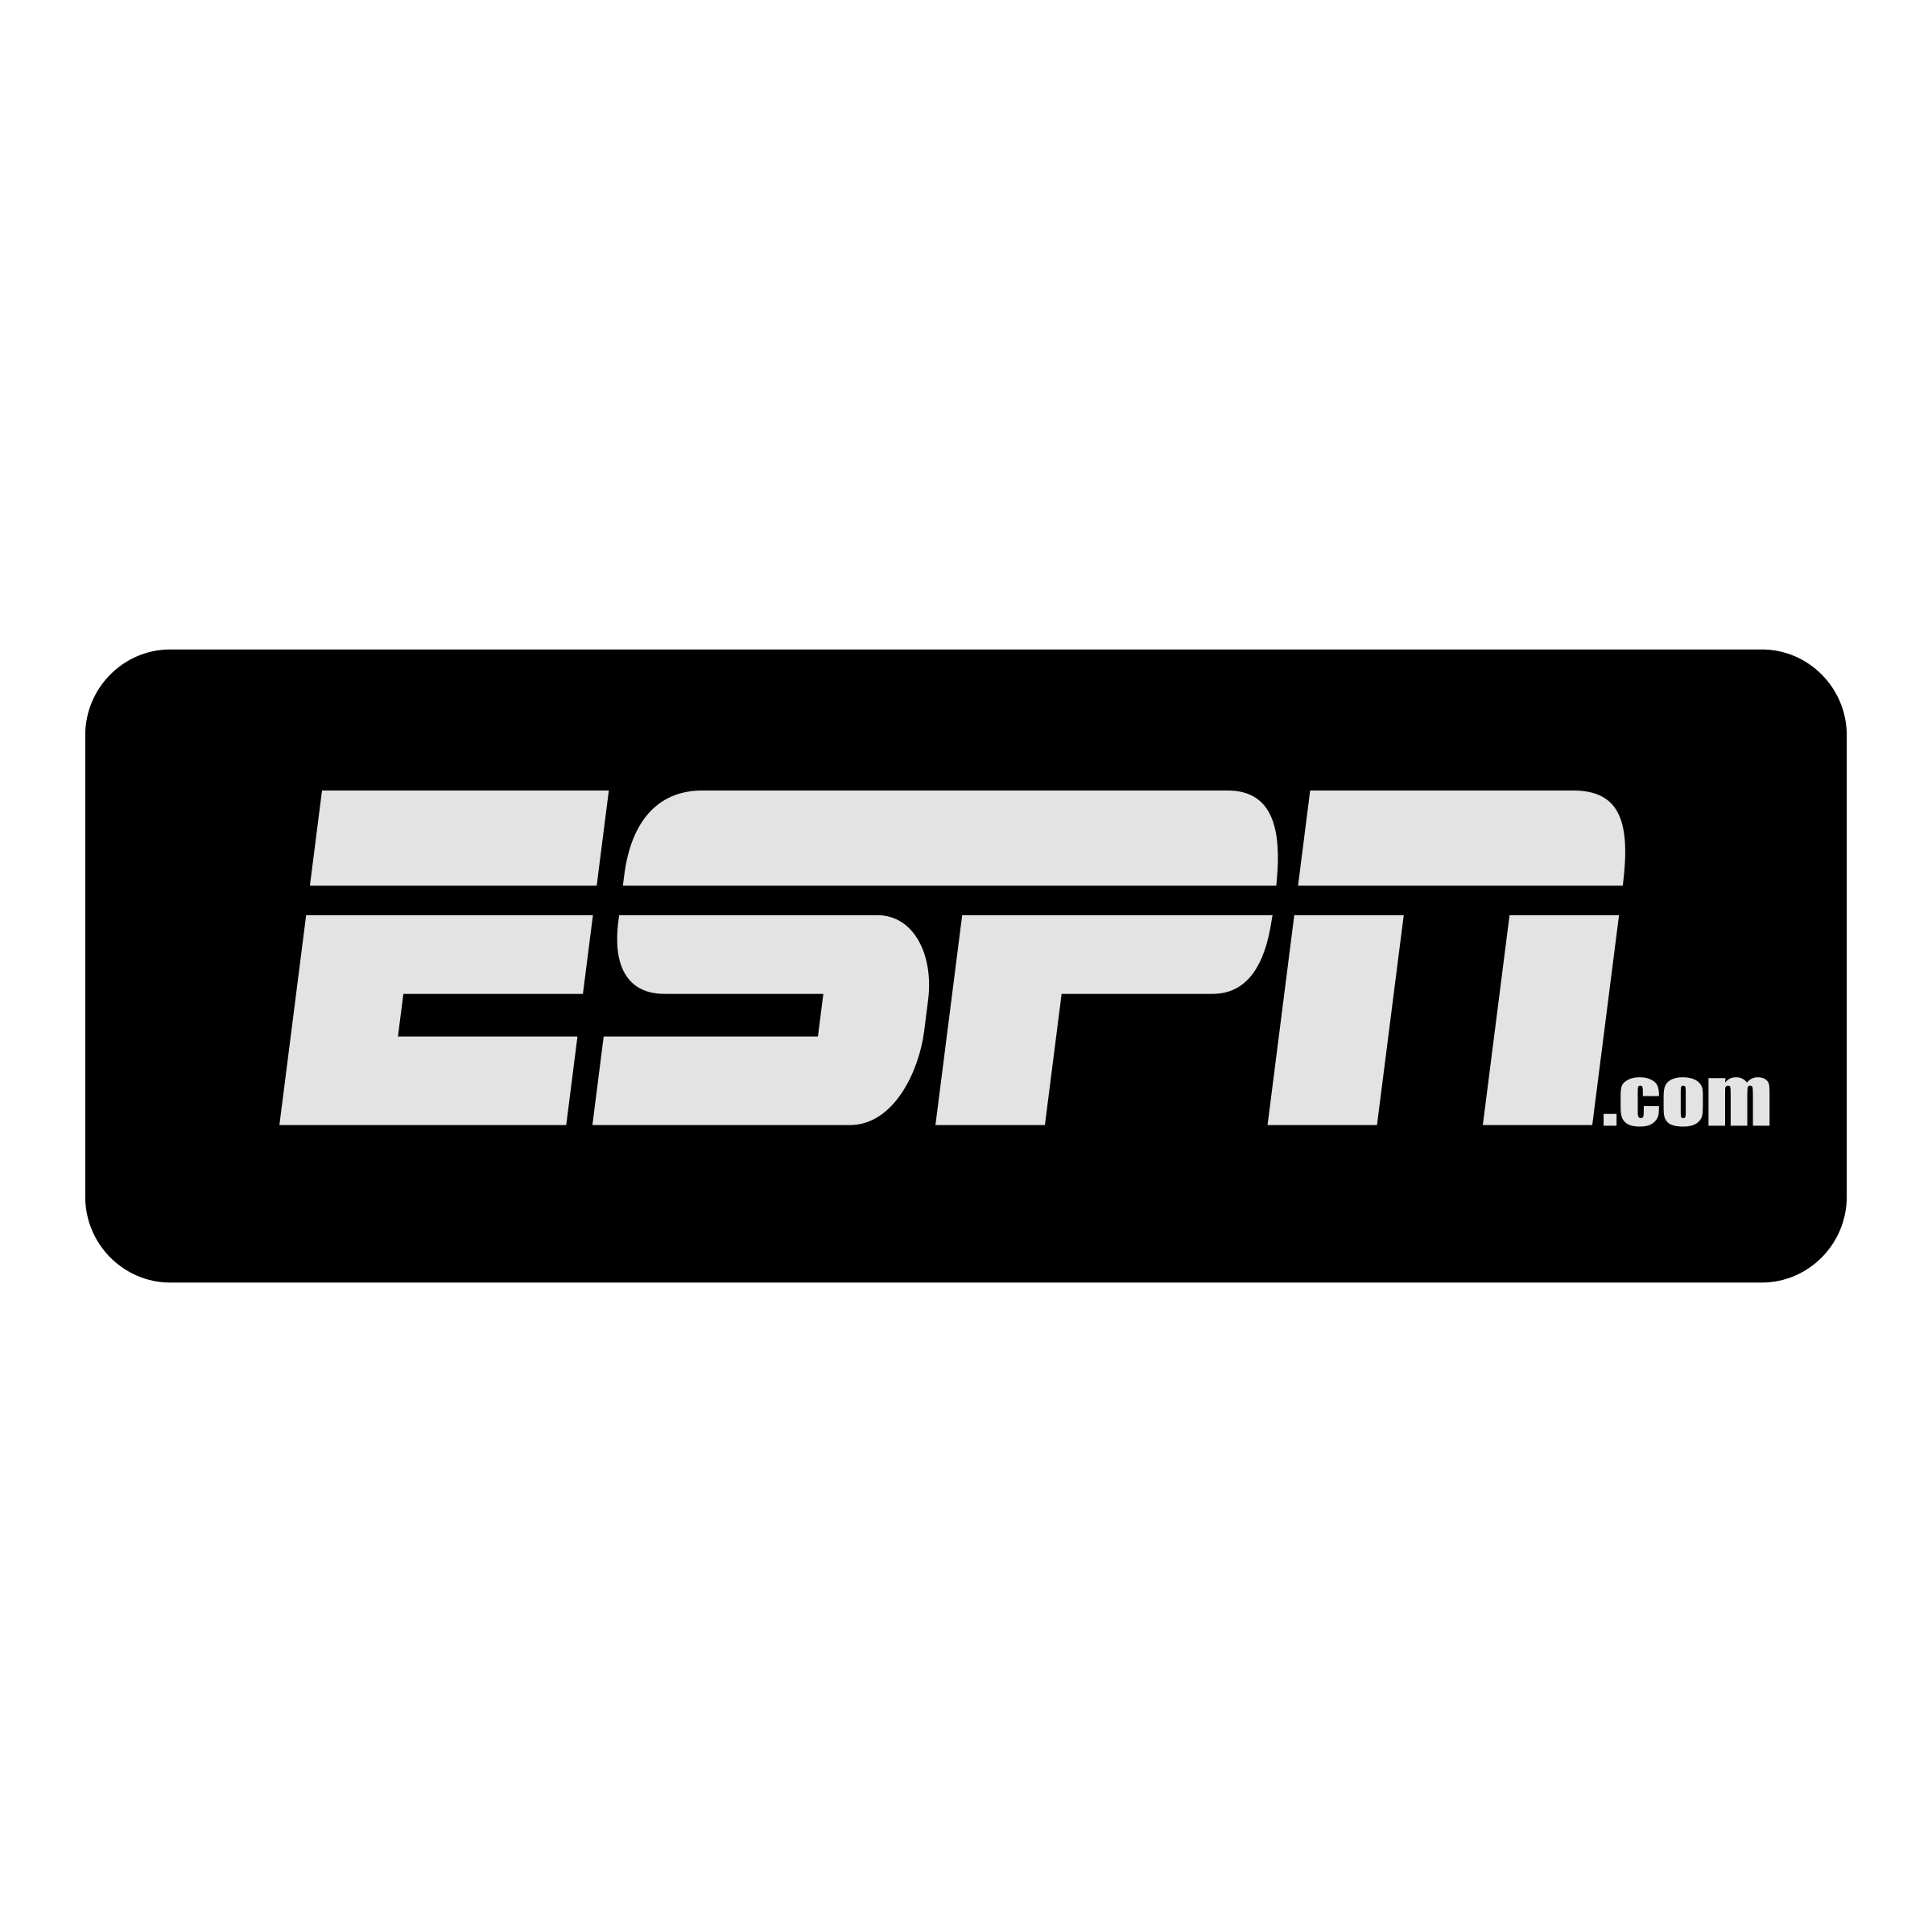 Collection of Espn Logo PNG. PlusPNG